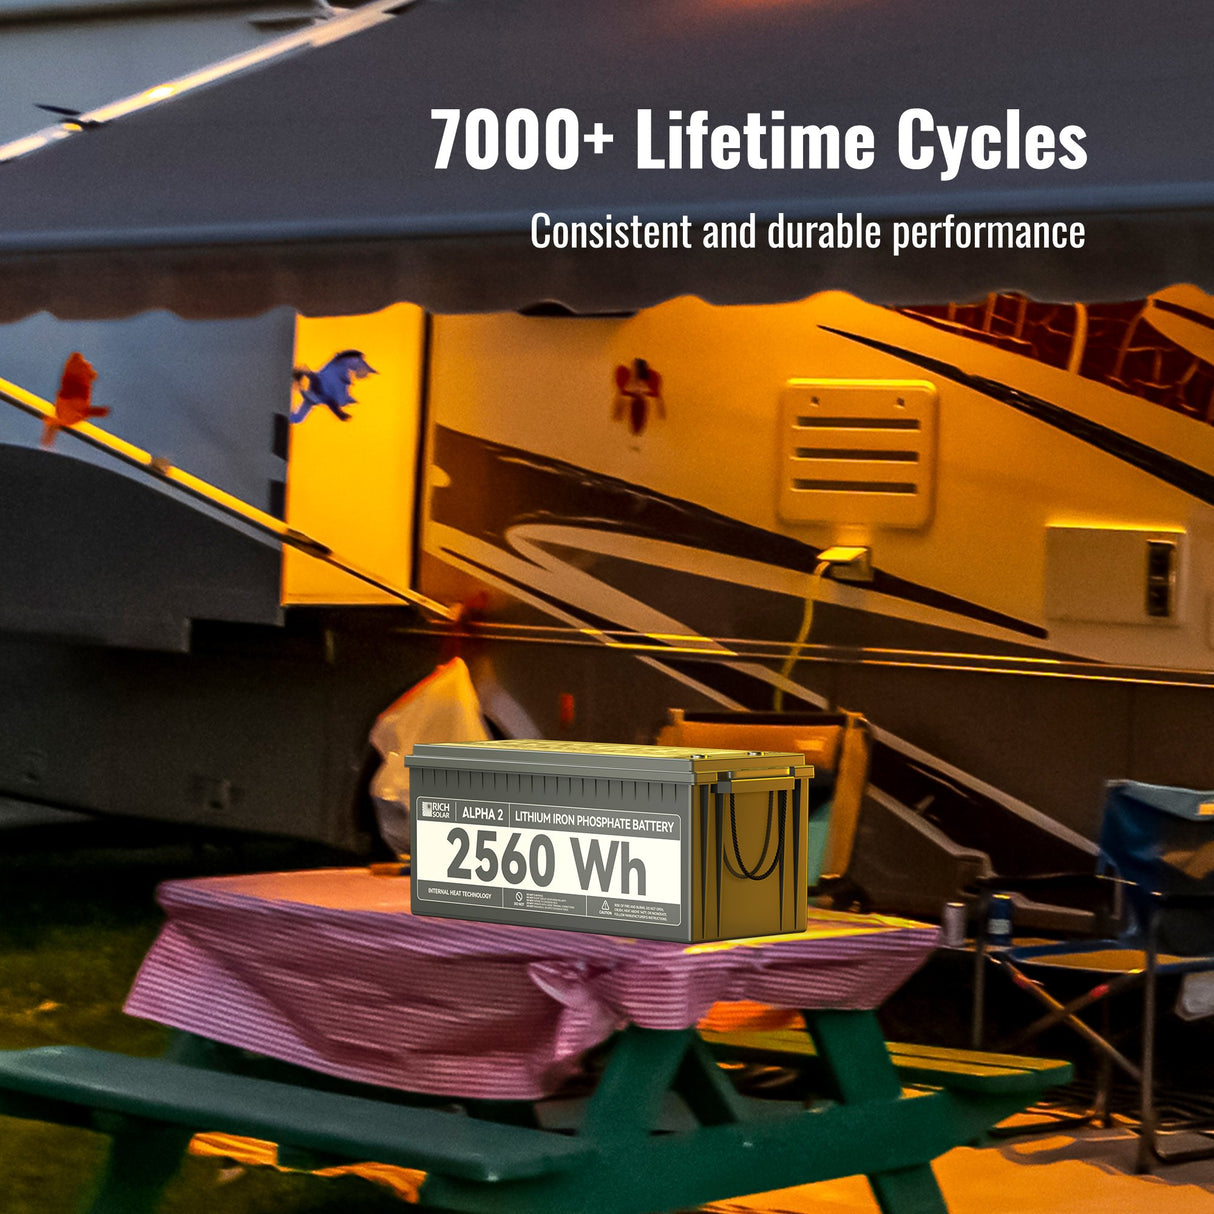 APLHA2 7000+ Lifetime Cycles Consistent and Durable Performance